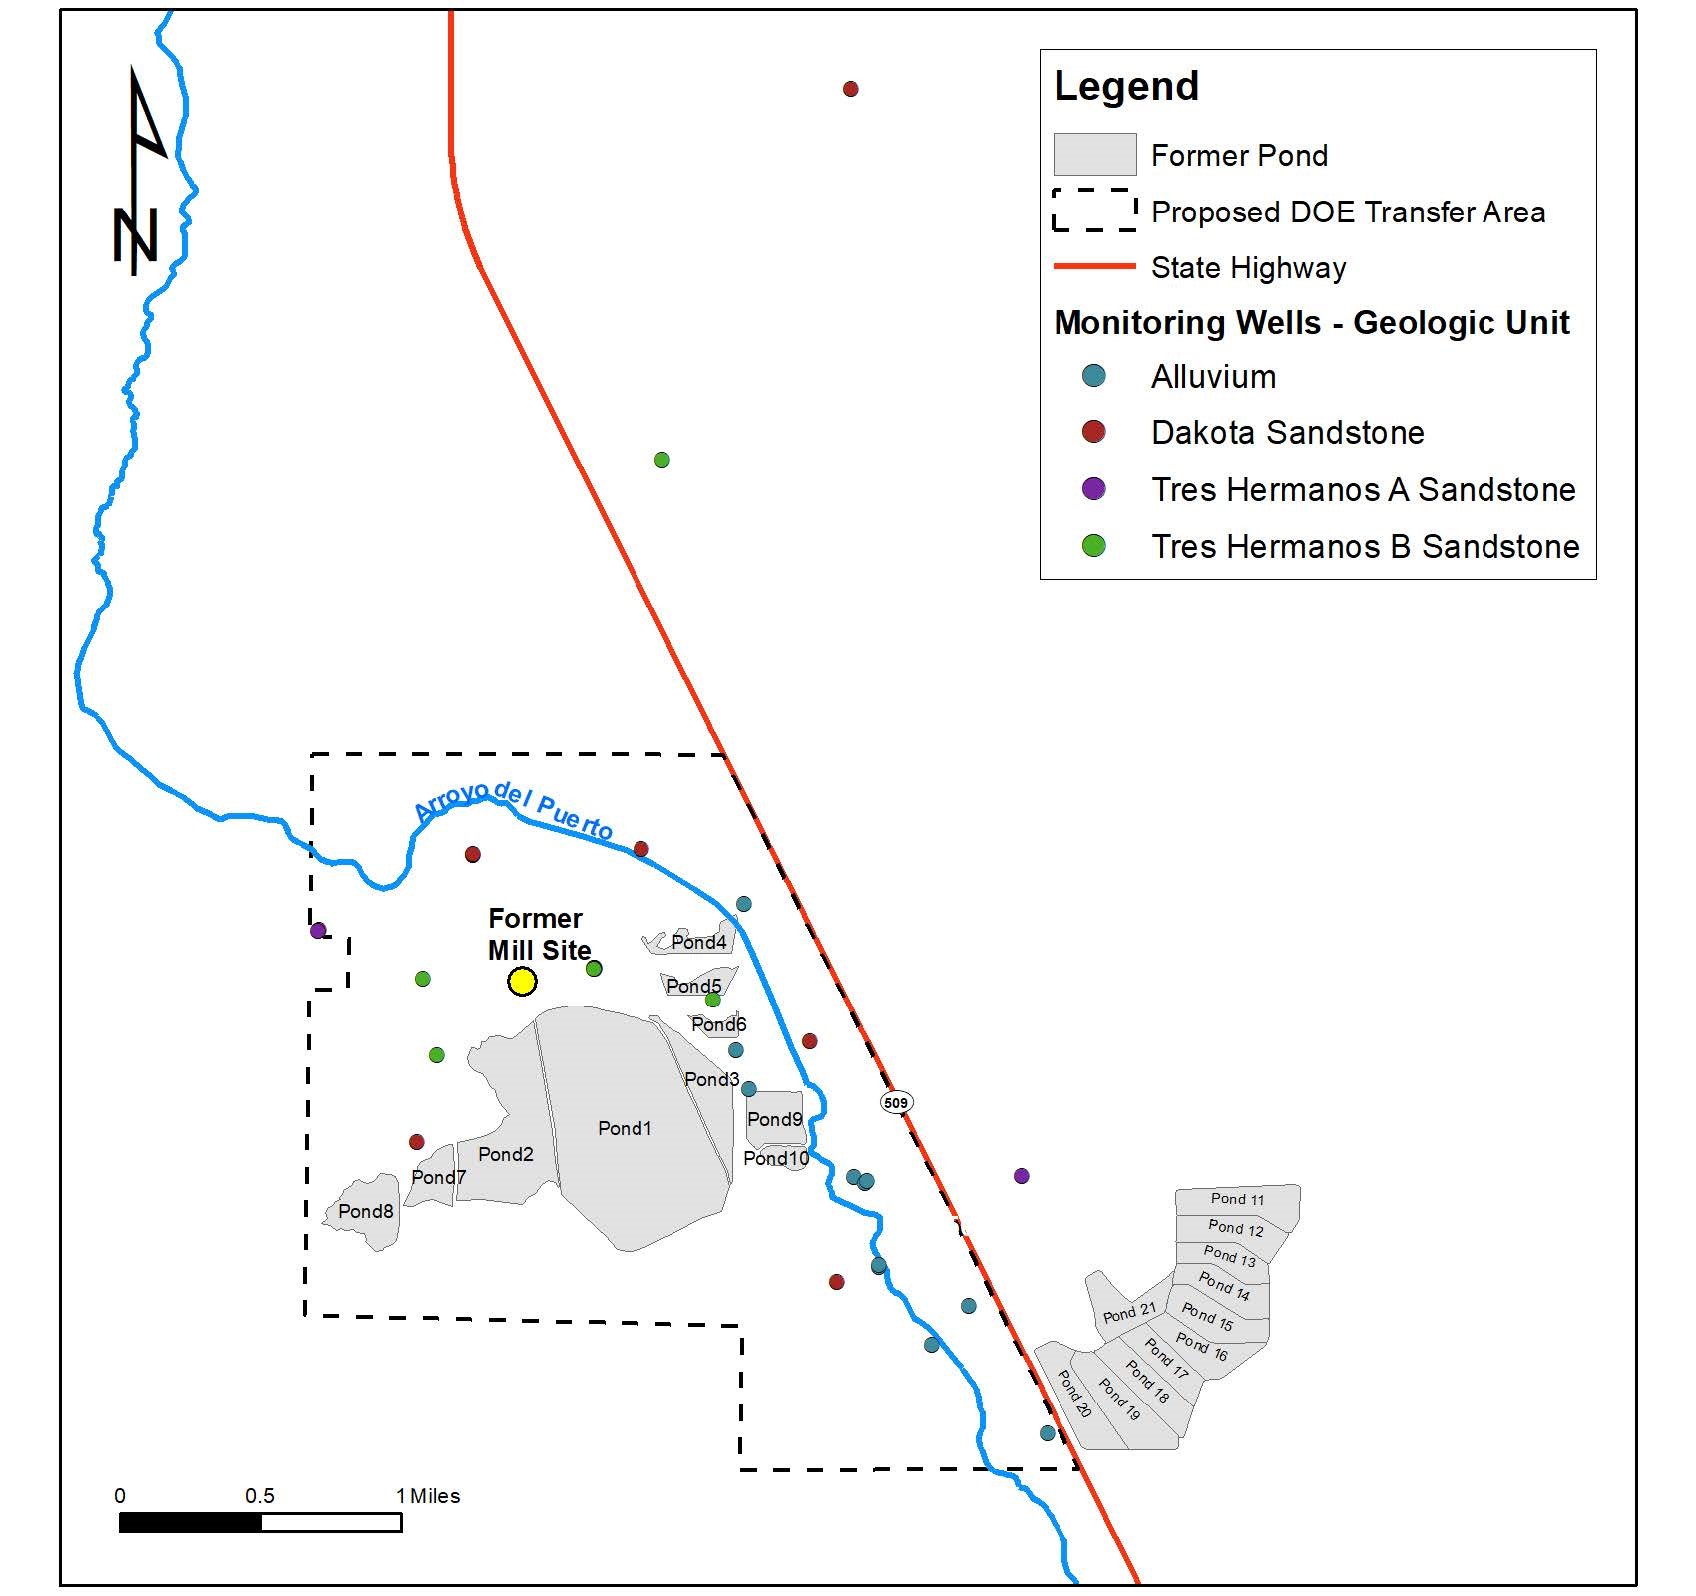 Figure 3: Monitoring Well Locations Stipulated in the Ambrosia Lake West Radioactive Material License